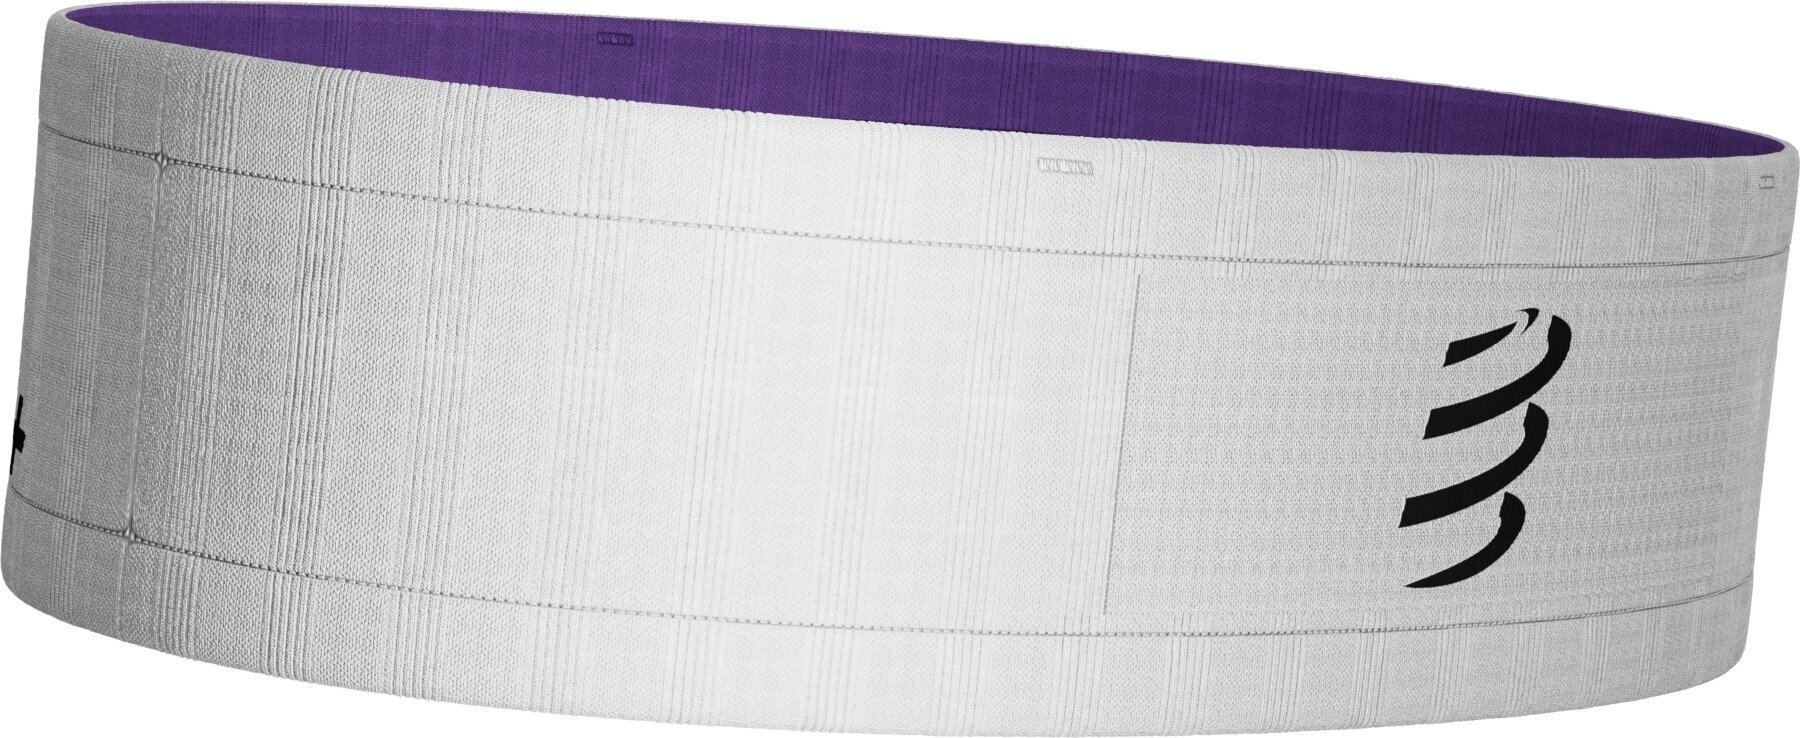 Hardloophoes Compressport Free Belt White/Royal Lilac M/L Hardloophoes